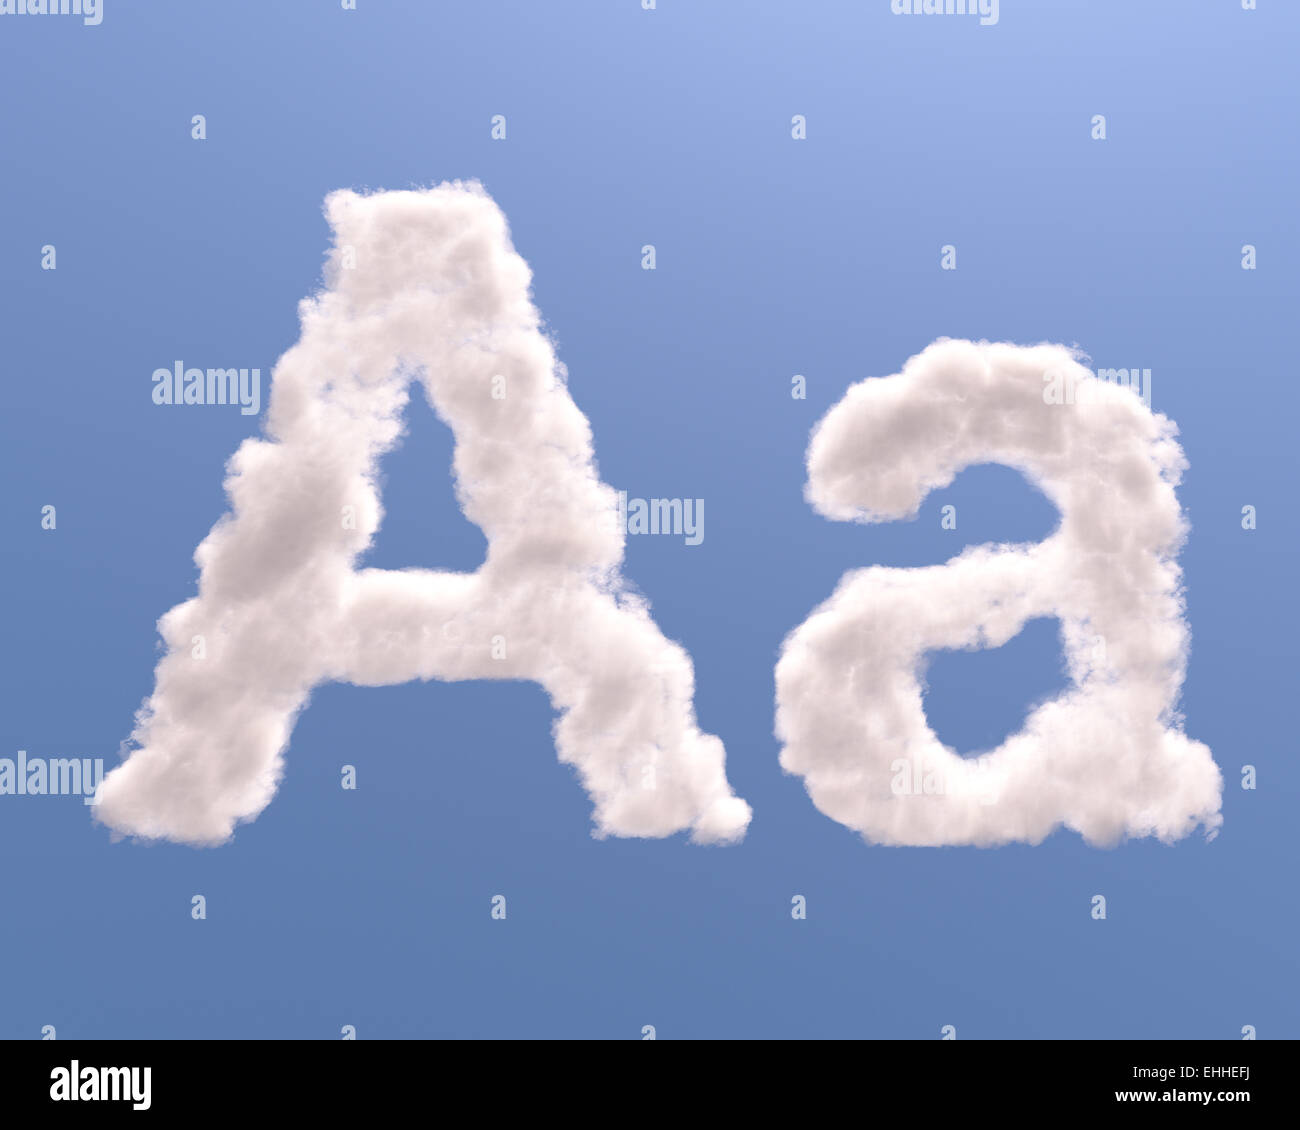 Buchstabe A Cloud Form Stockfoto